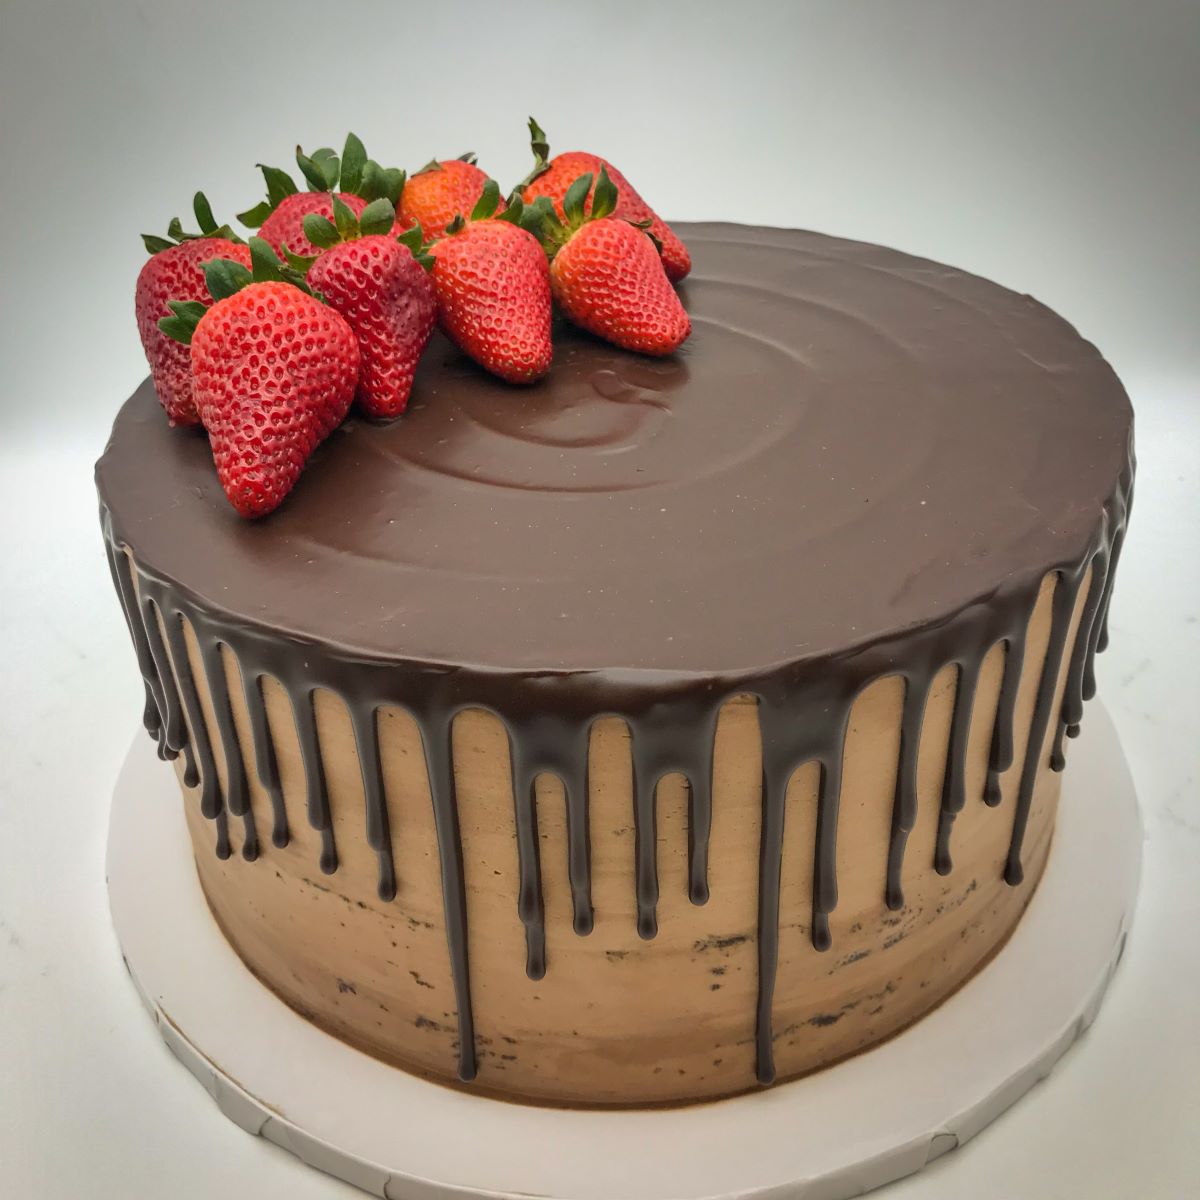 A chocolate cake with a simple chocolate ganache drizzle topped with fresh strawberries.